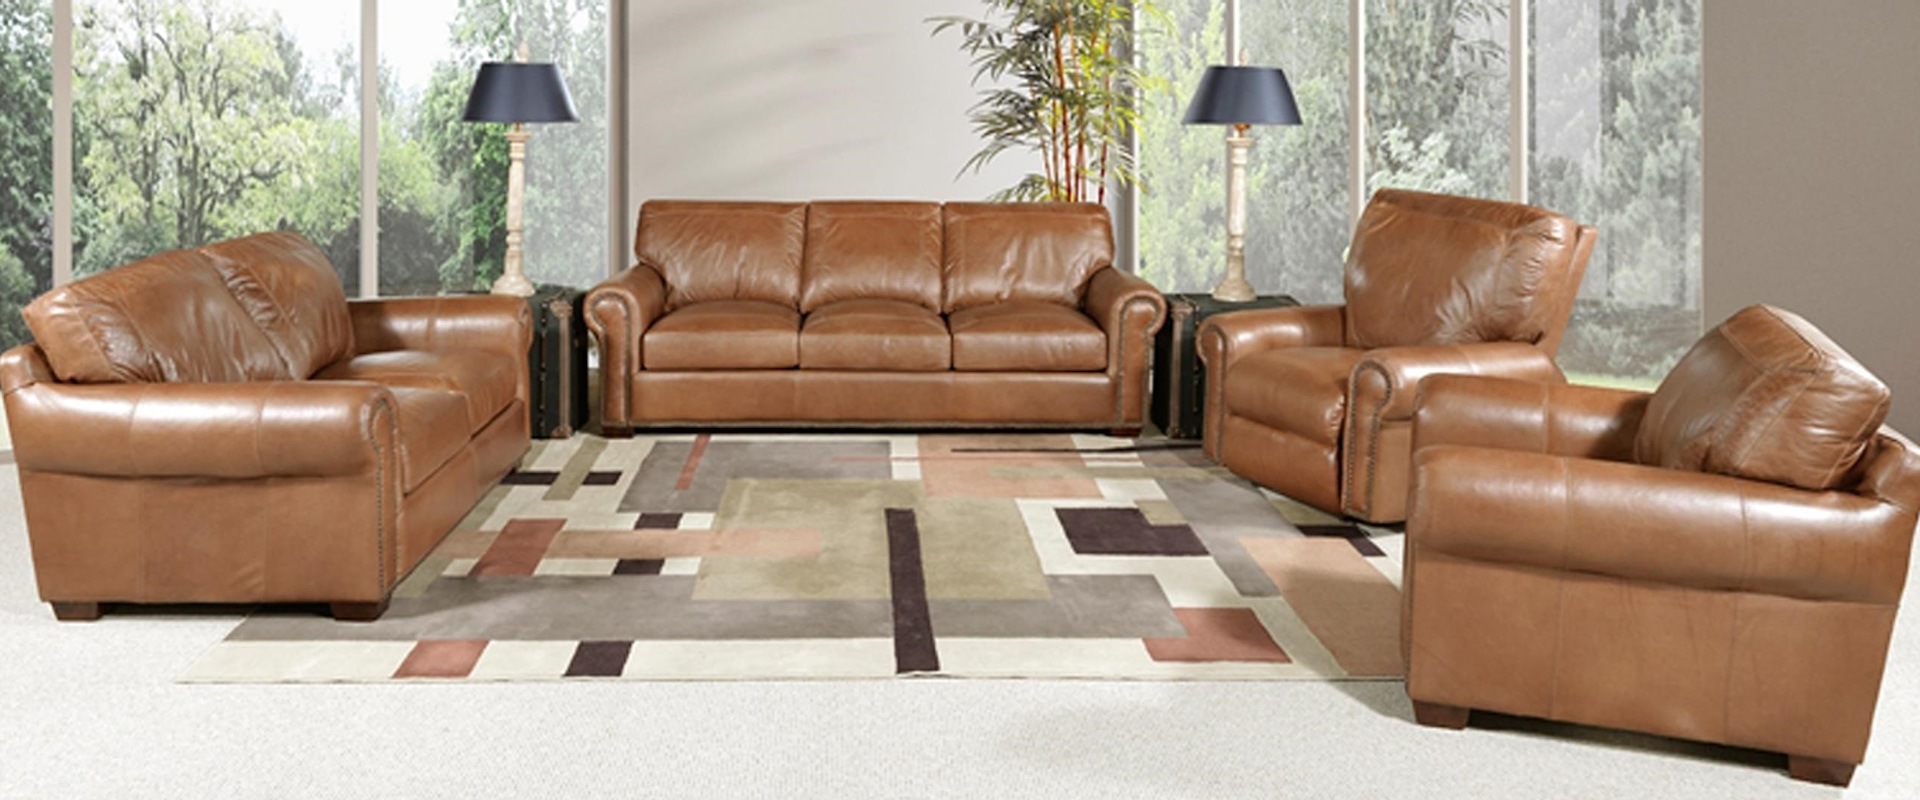 Saddle Leather Sofa, Leather Loveseat and Leather Chair Set